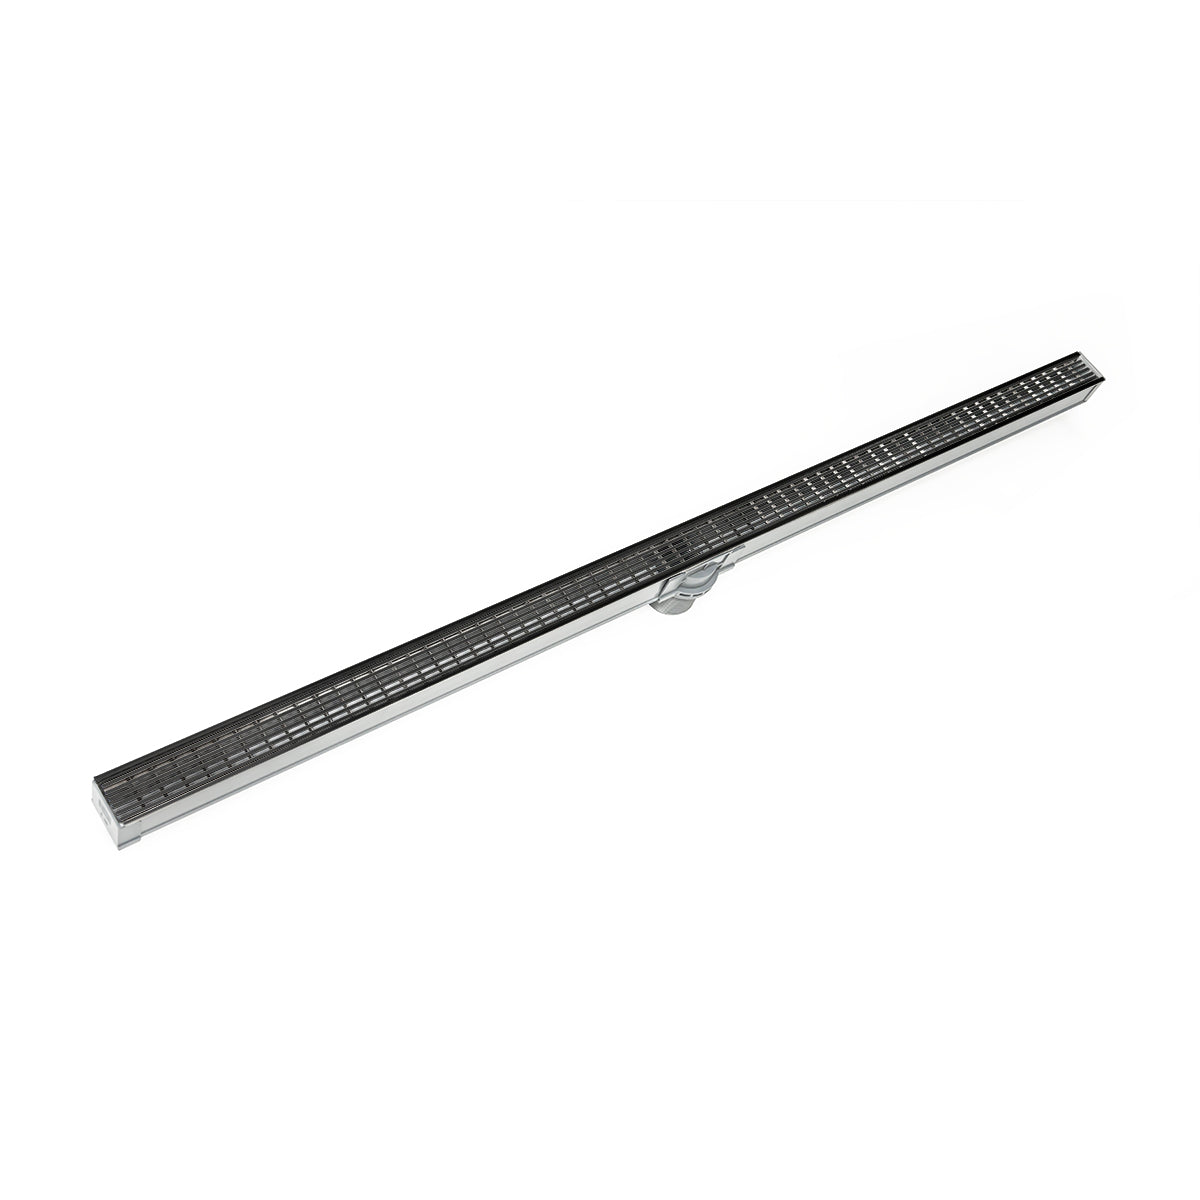 Infinity Drain 72" S-PVC Series Site Sizable Linear Drain Kit with 1 1/2" Wedge Wire Grate